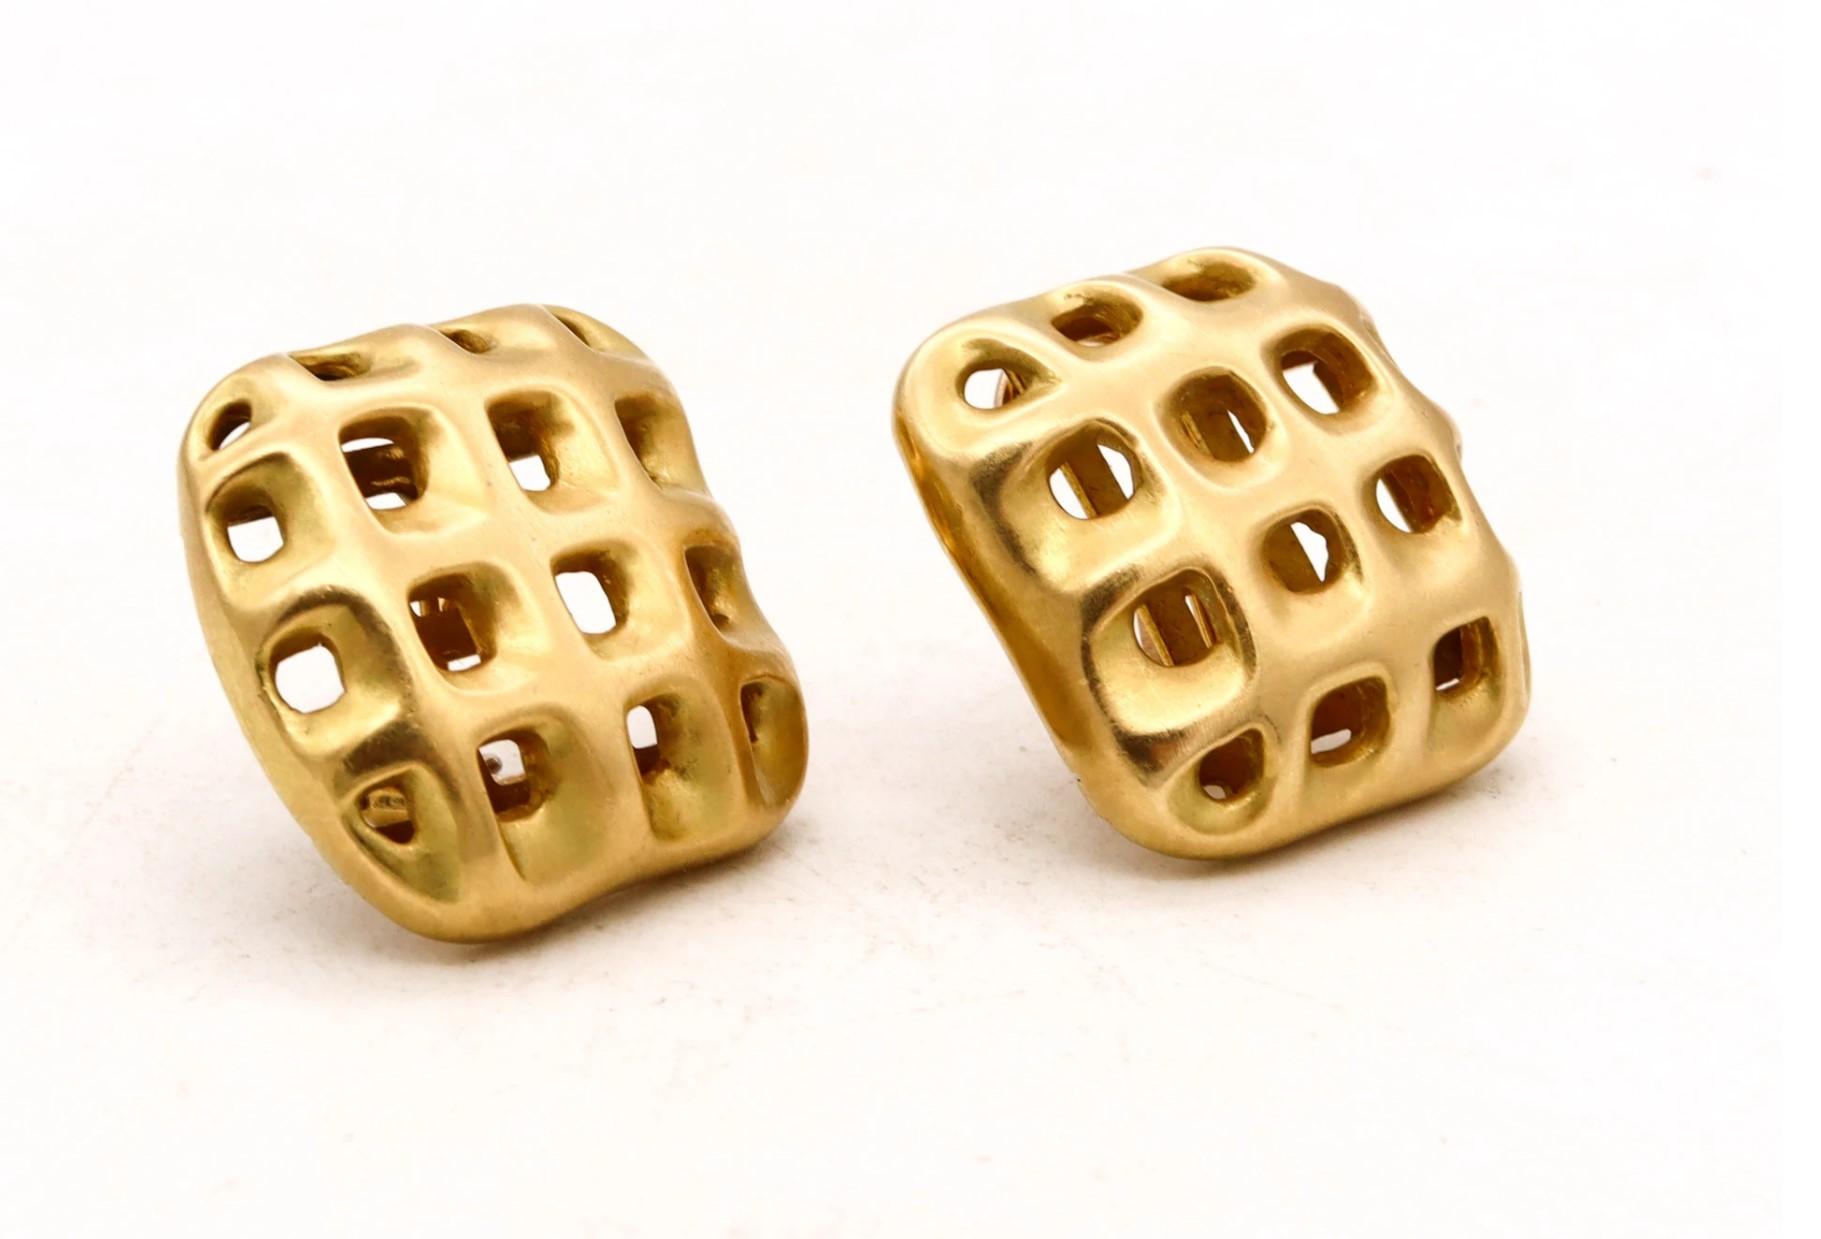 Pair of earrings designed by Angela Cummings.

Great three-dimensional sculptural pieces, created by Cummings at her New York studio, back in the 1987. This pair of earrings has been designed, with an intricate patterns of perforations, carefully